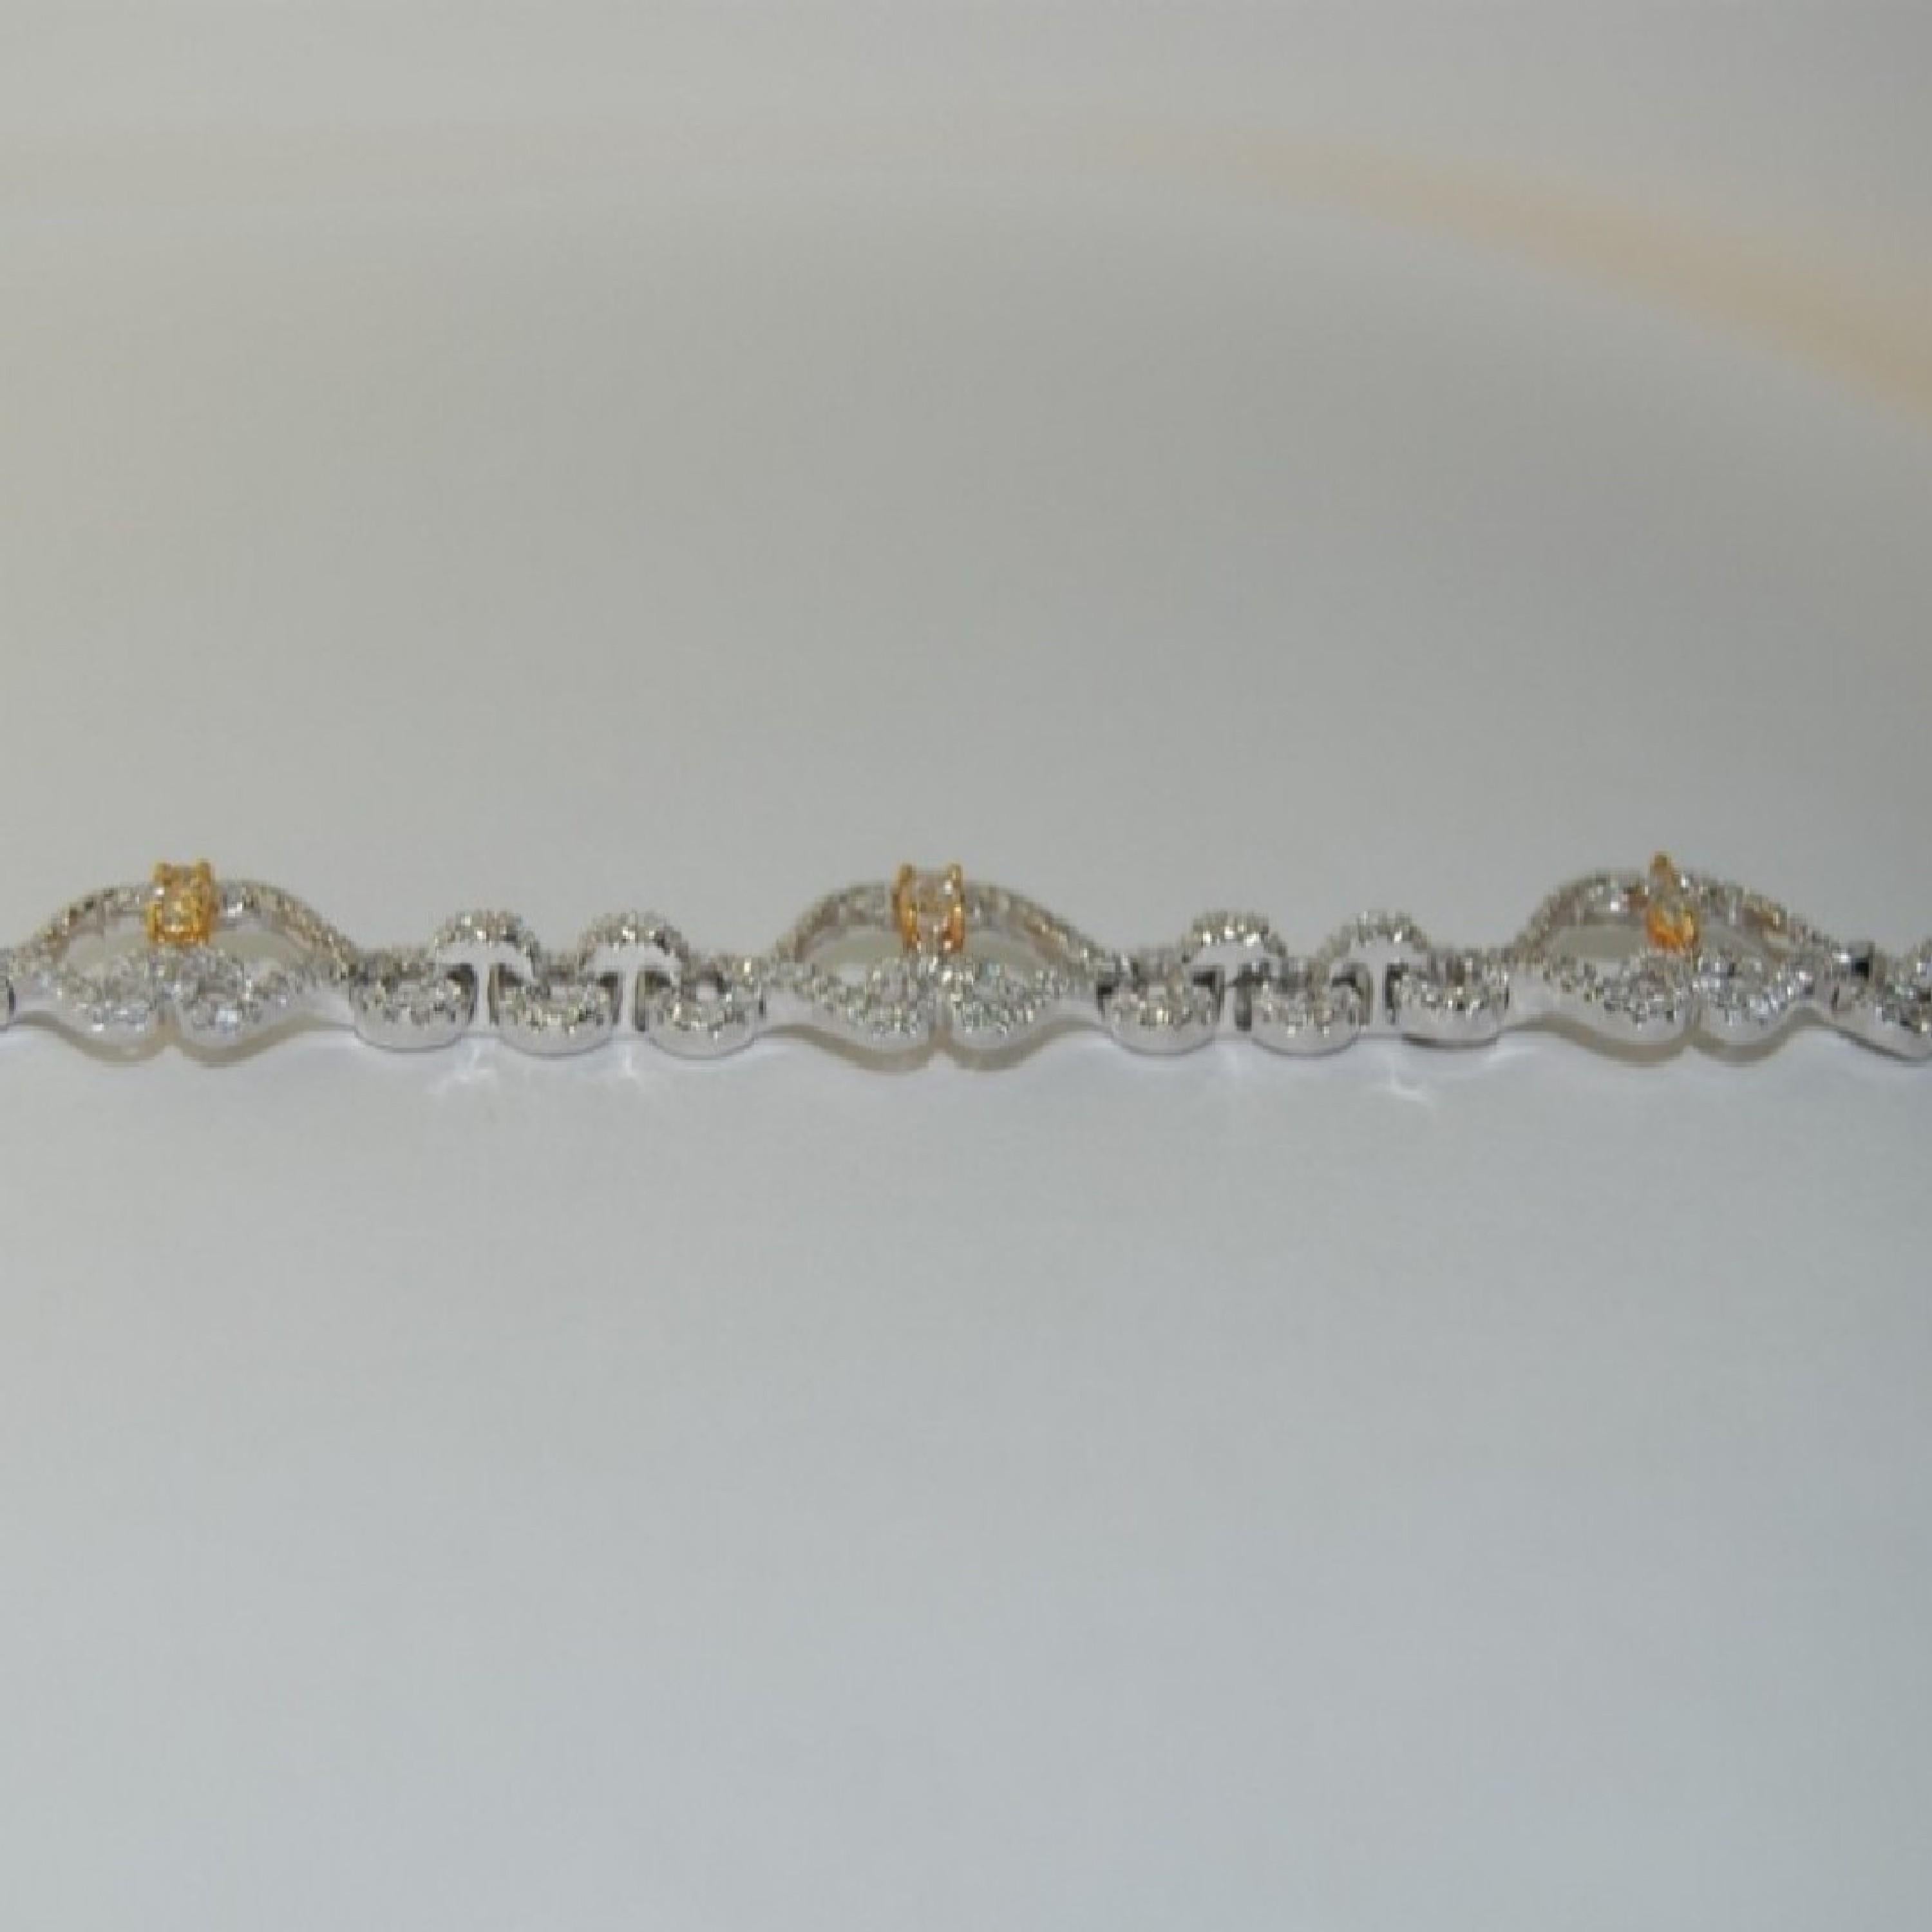 Oval Cut 14 Karat White Gold Bracelet with White and Fancy Diamond/Yellow For Sale